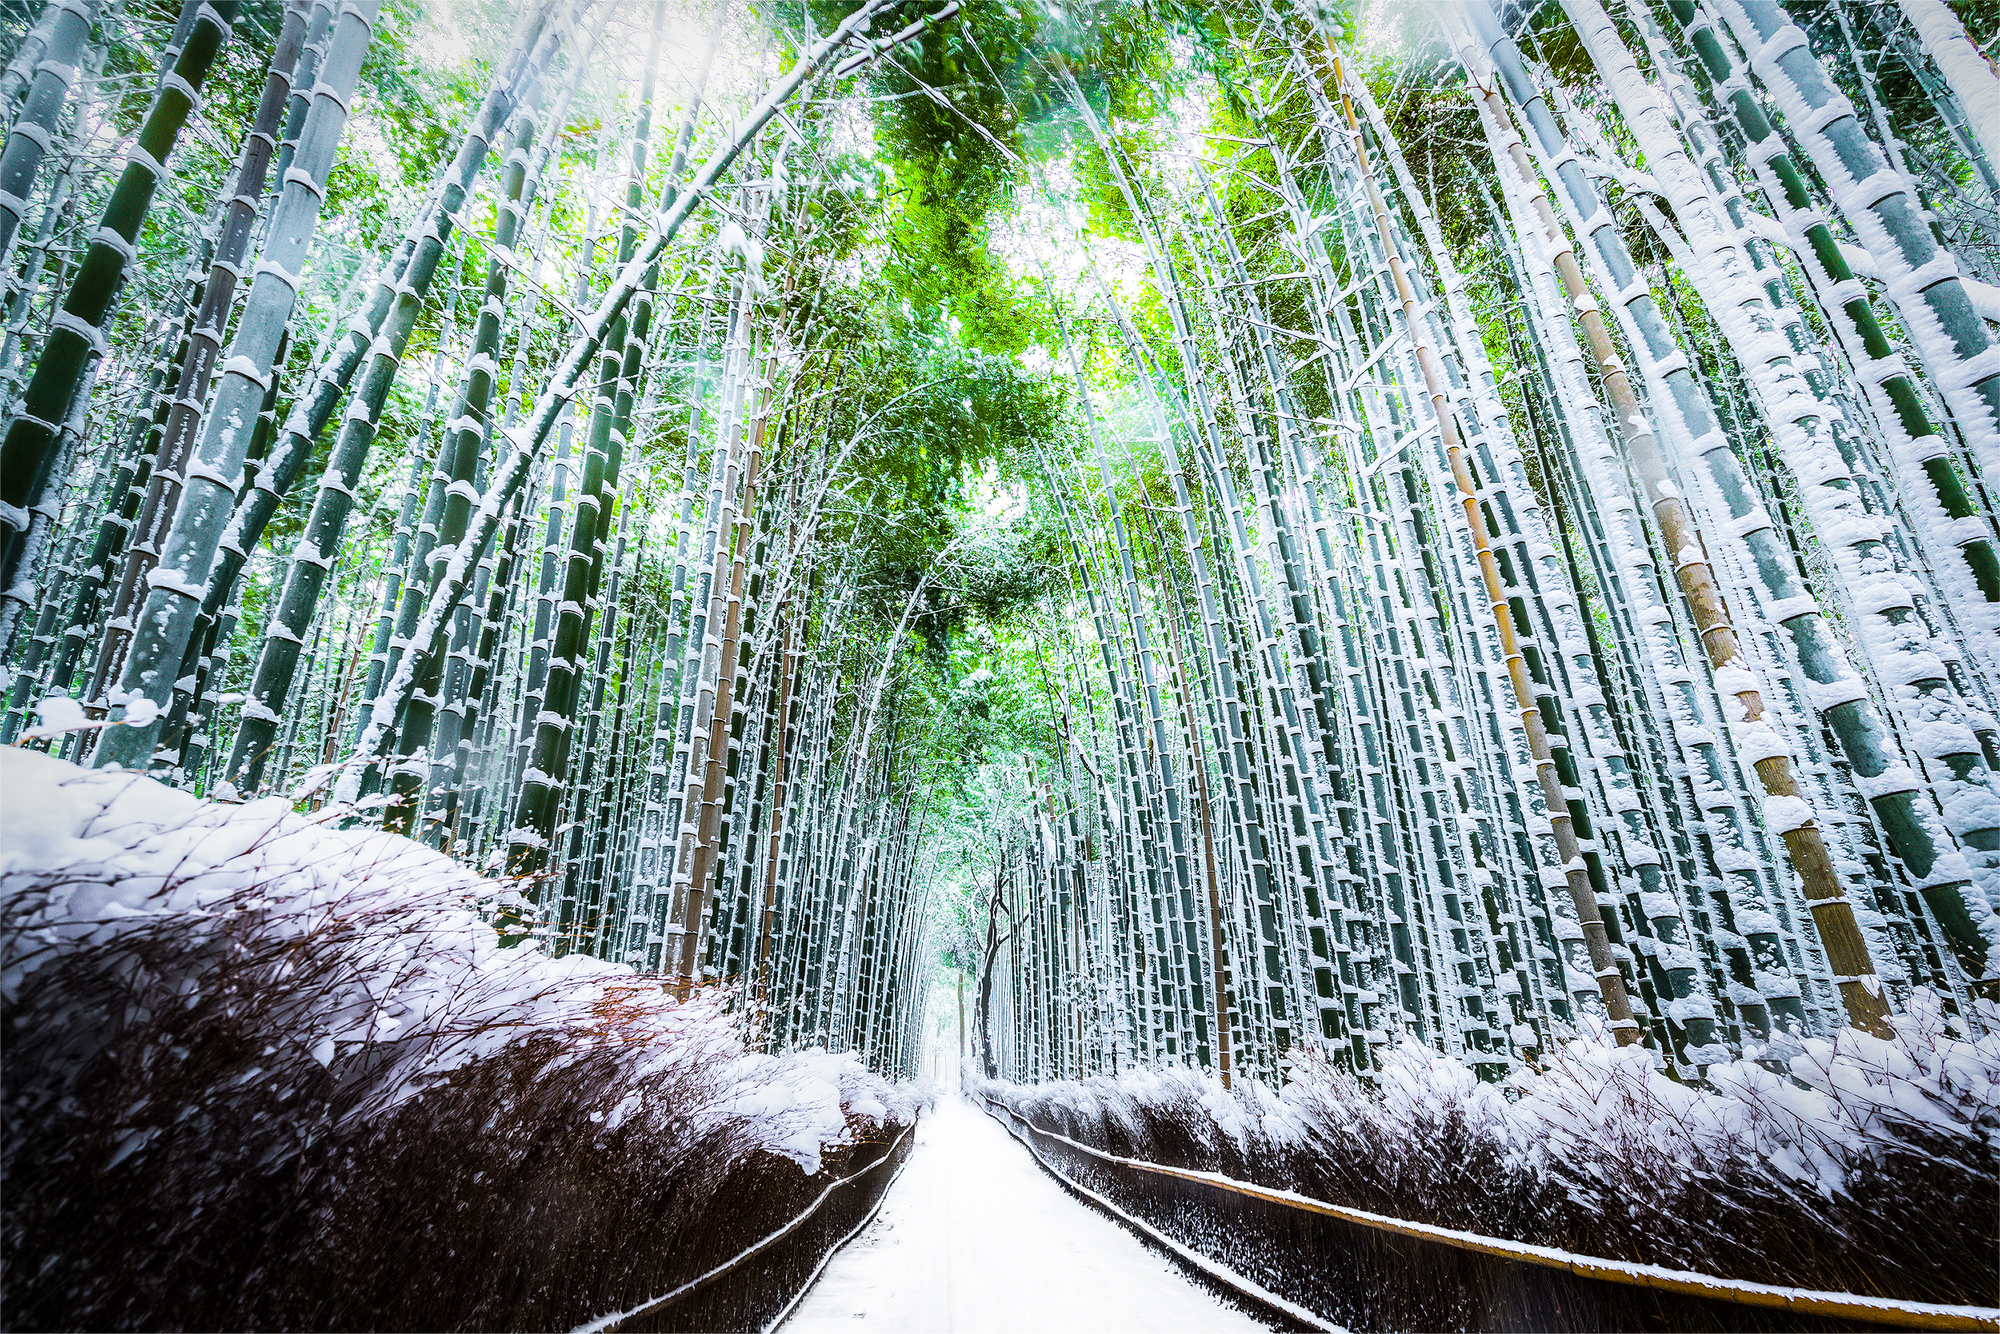 Exciting Walks Through the Bamboo Forest